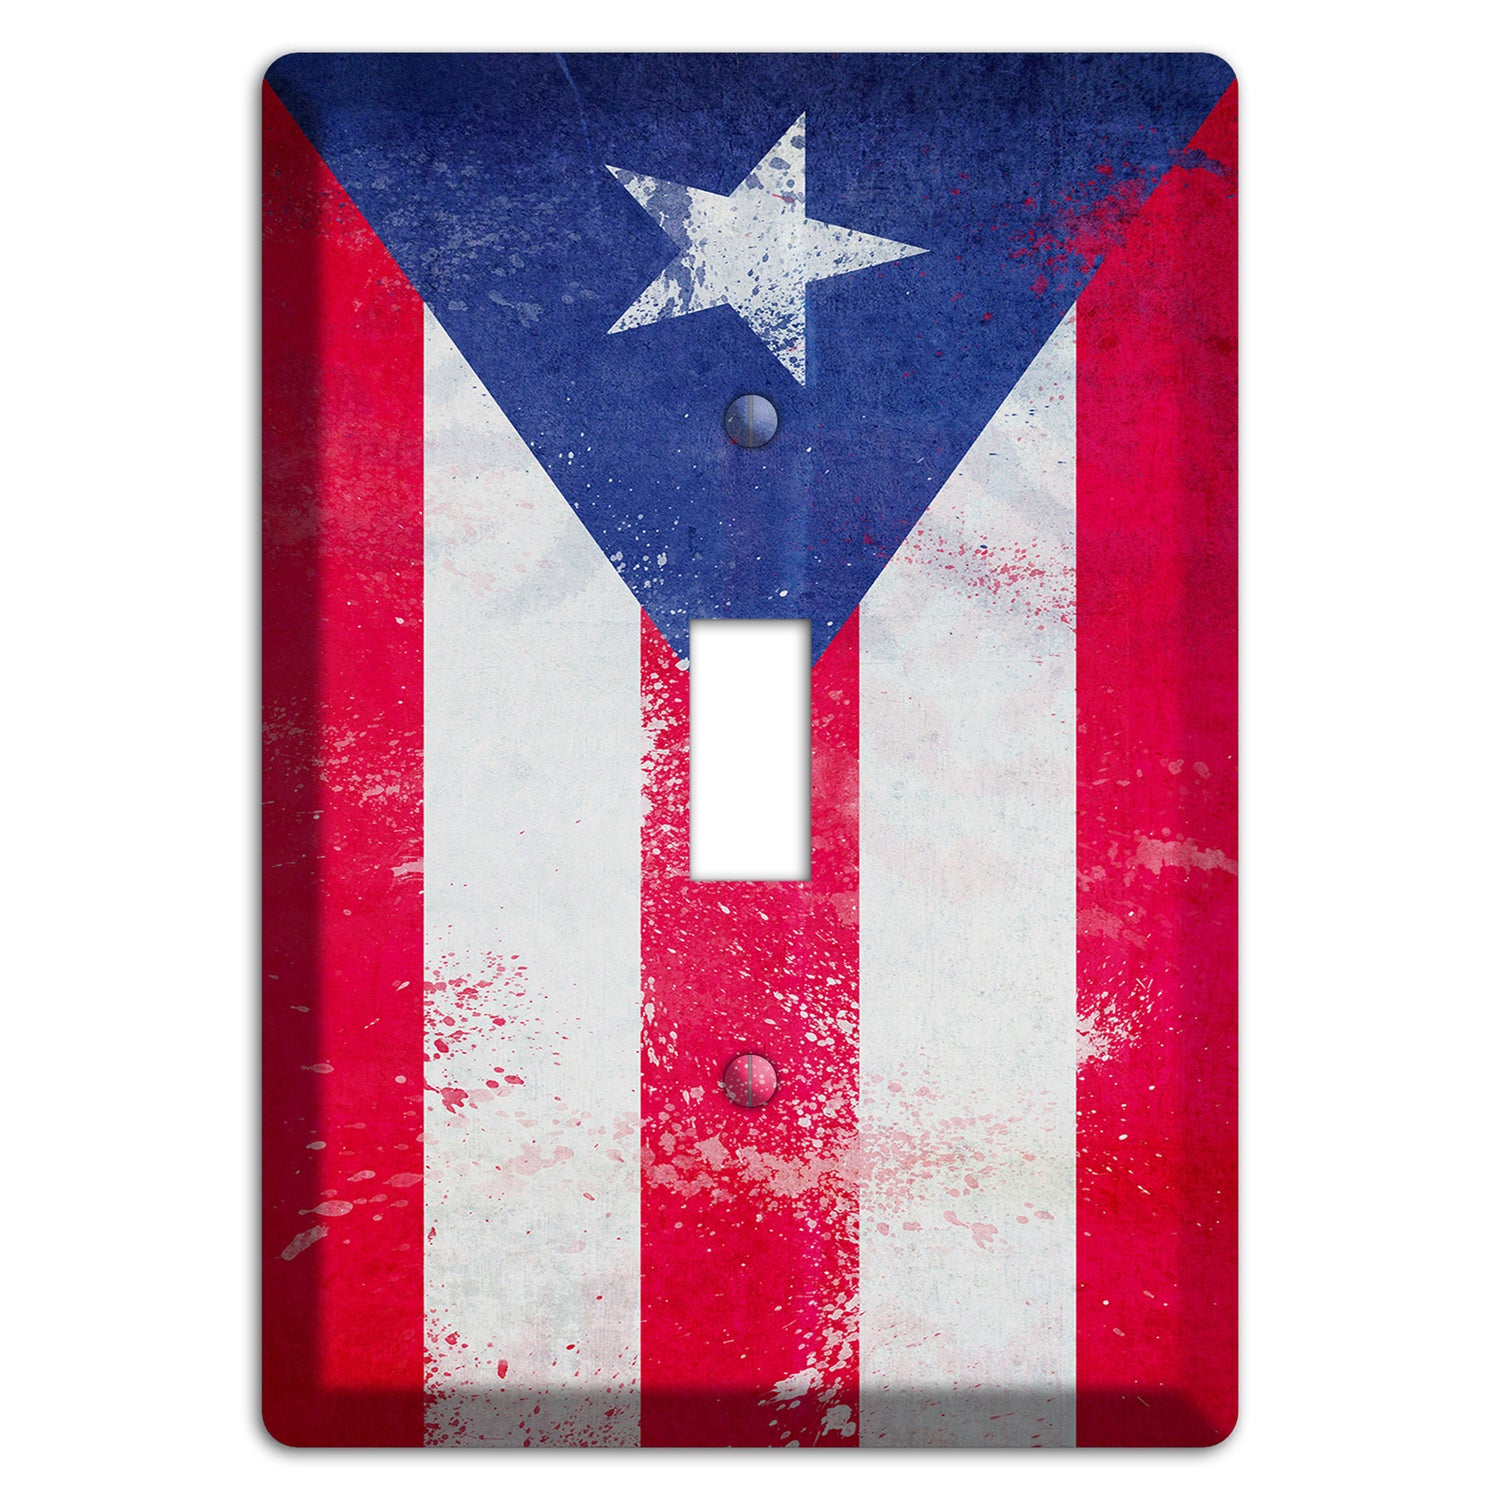 Puerto Rico Cover Plates Cover Plates